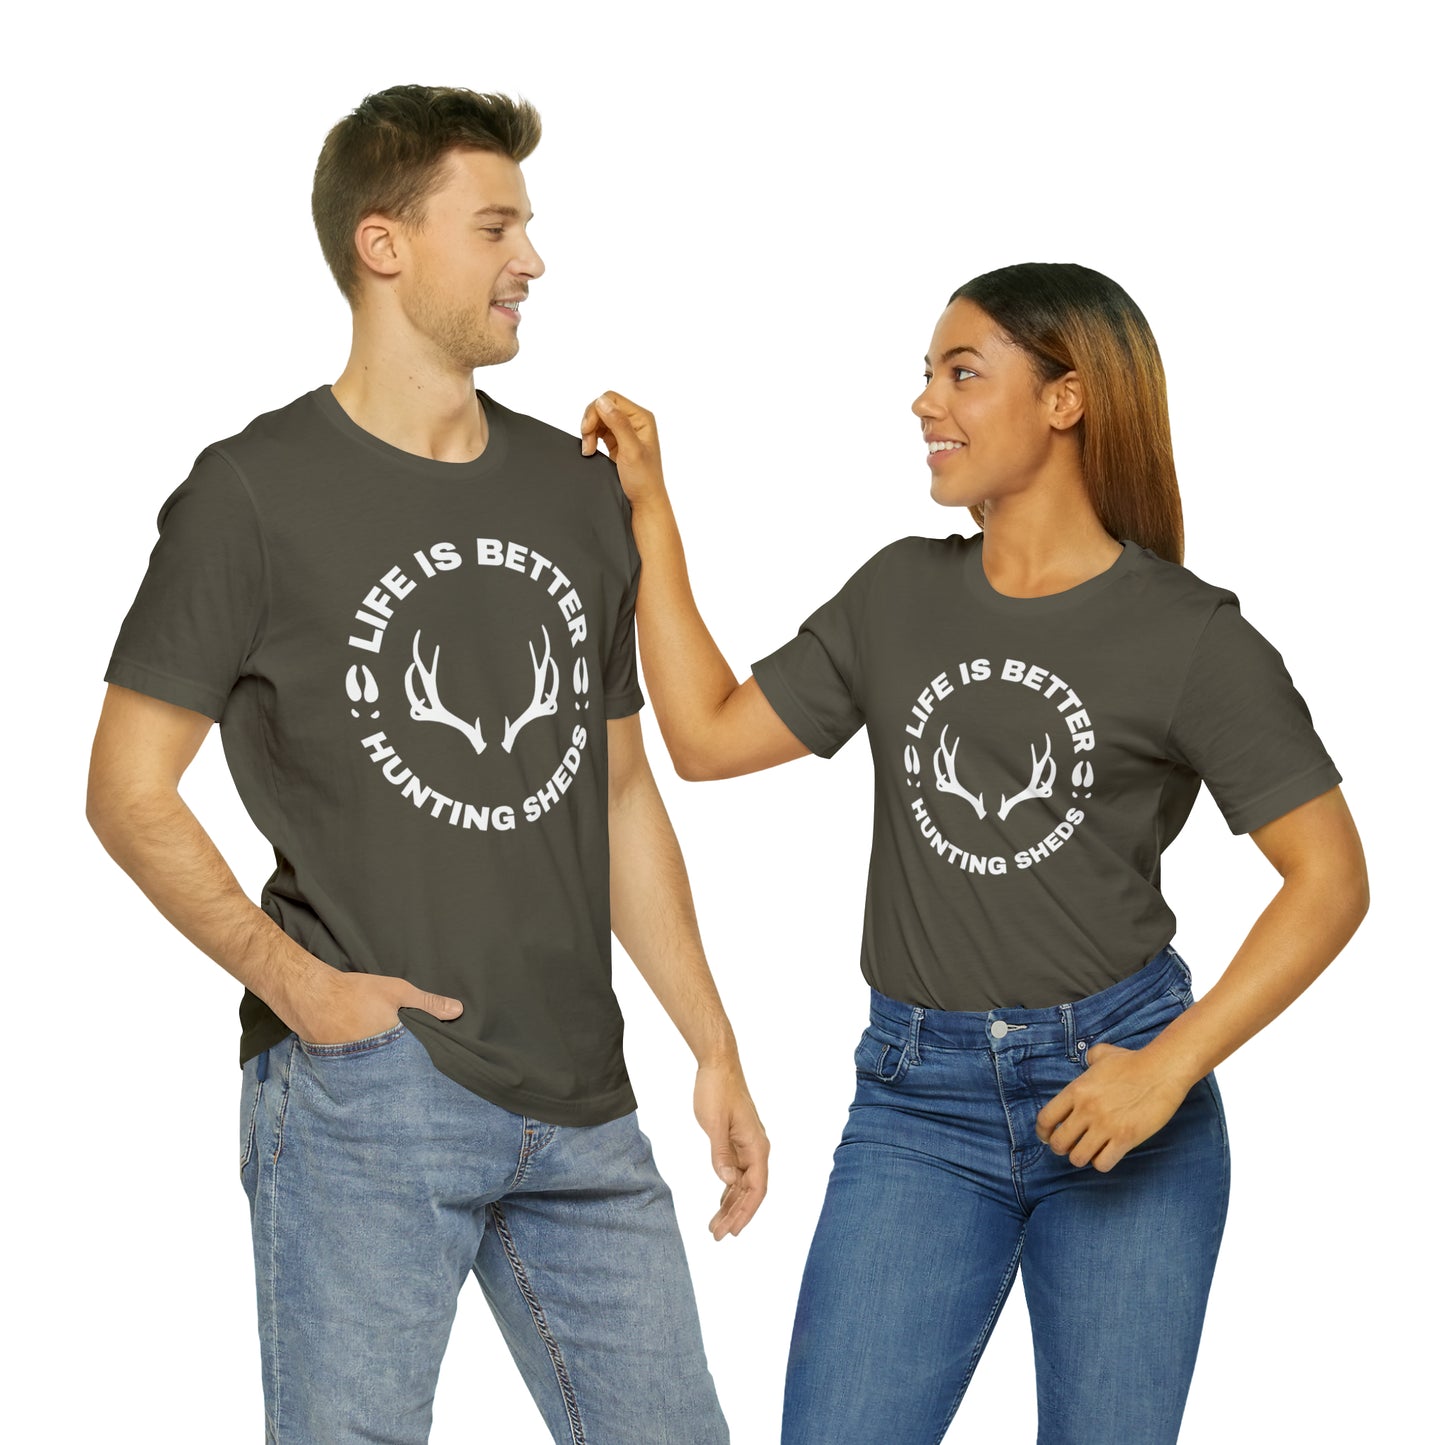 "Life is better hunting sheds" - Unisex Short Sleeve Tee